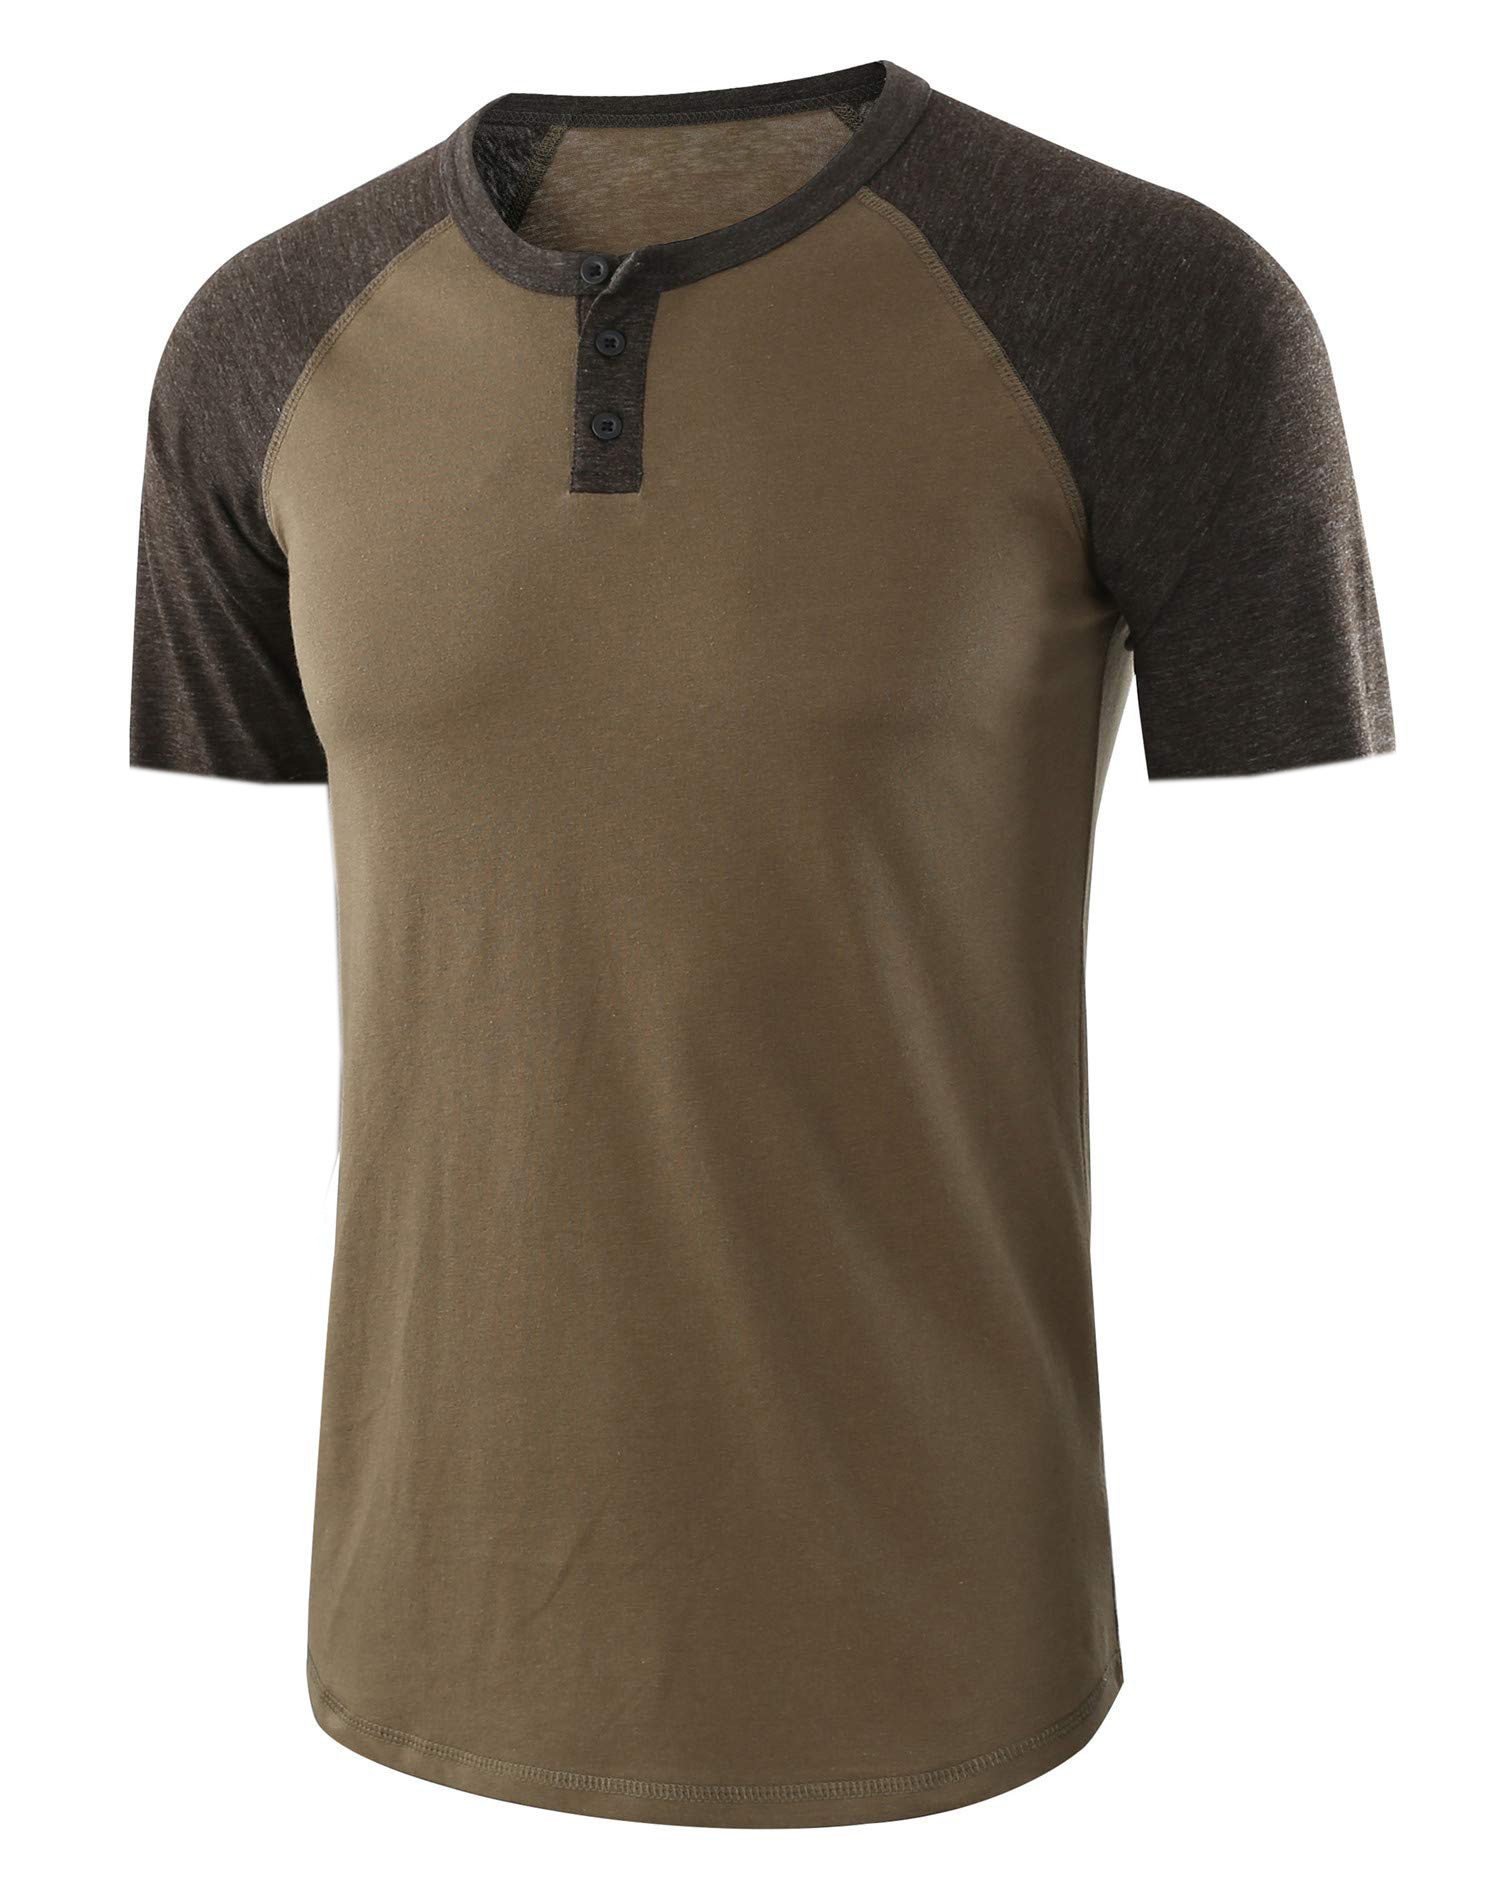 Men's athletic fit shirts, finding the right athletic fit shirt can significantly enhance your comfort, performance